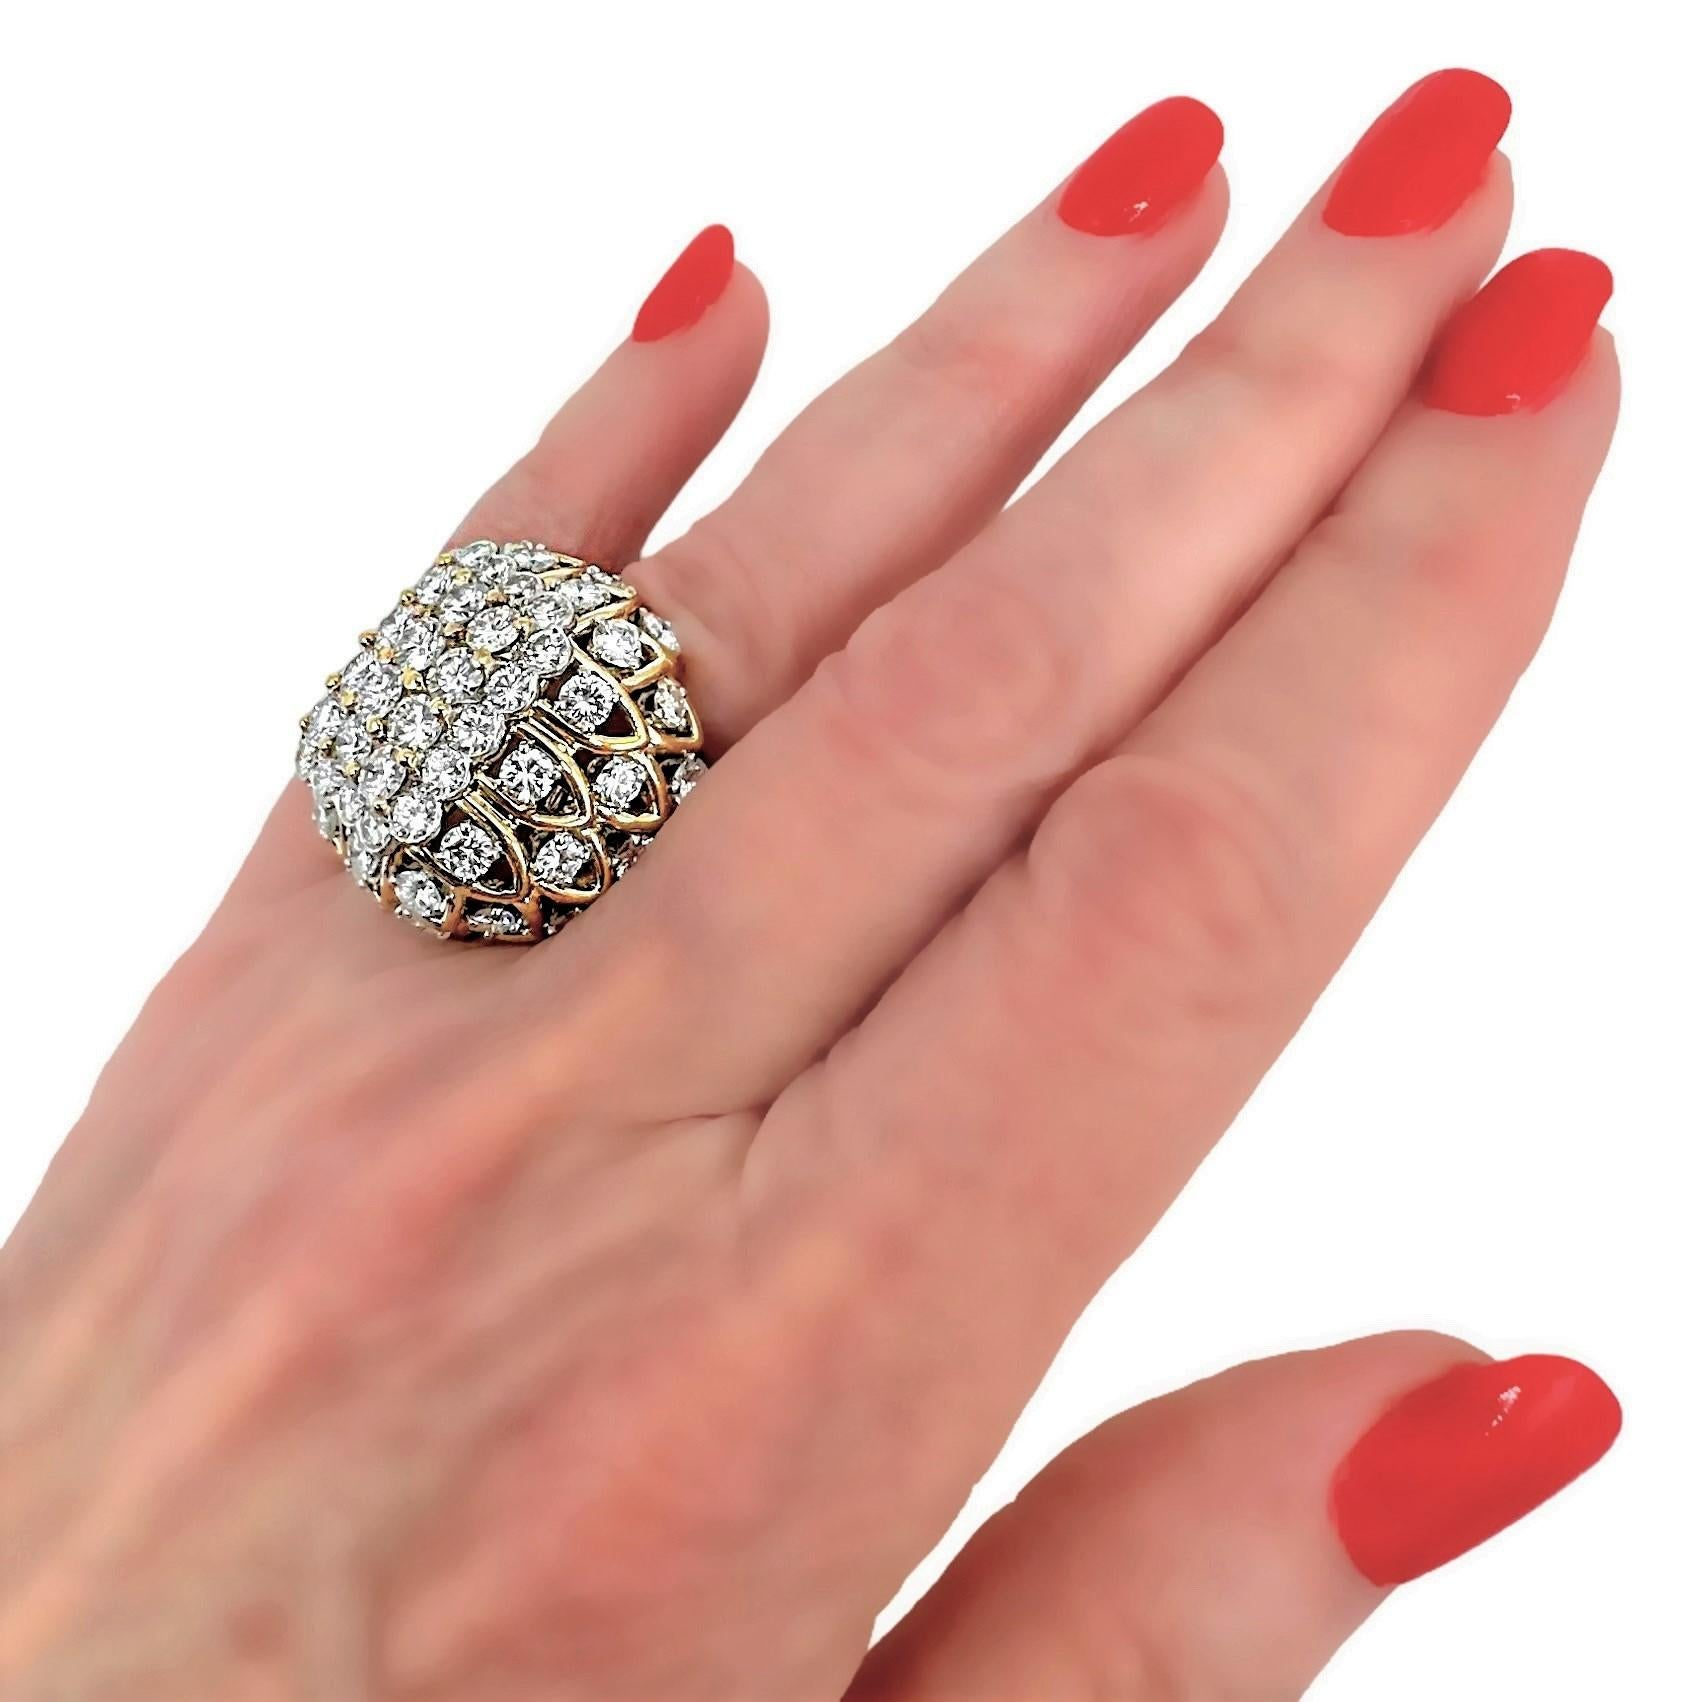 Large Scale 1970s Diamond Platinum and Gold Cocktail Ring 8.5carats Total For Sale 2